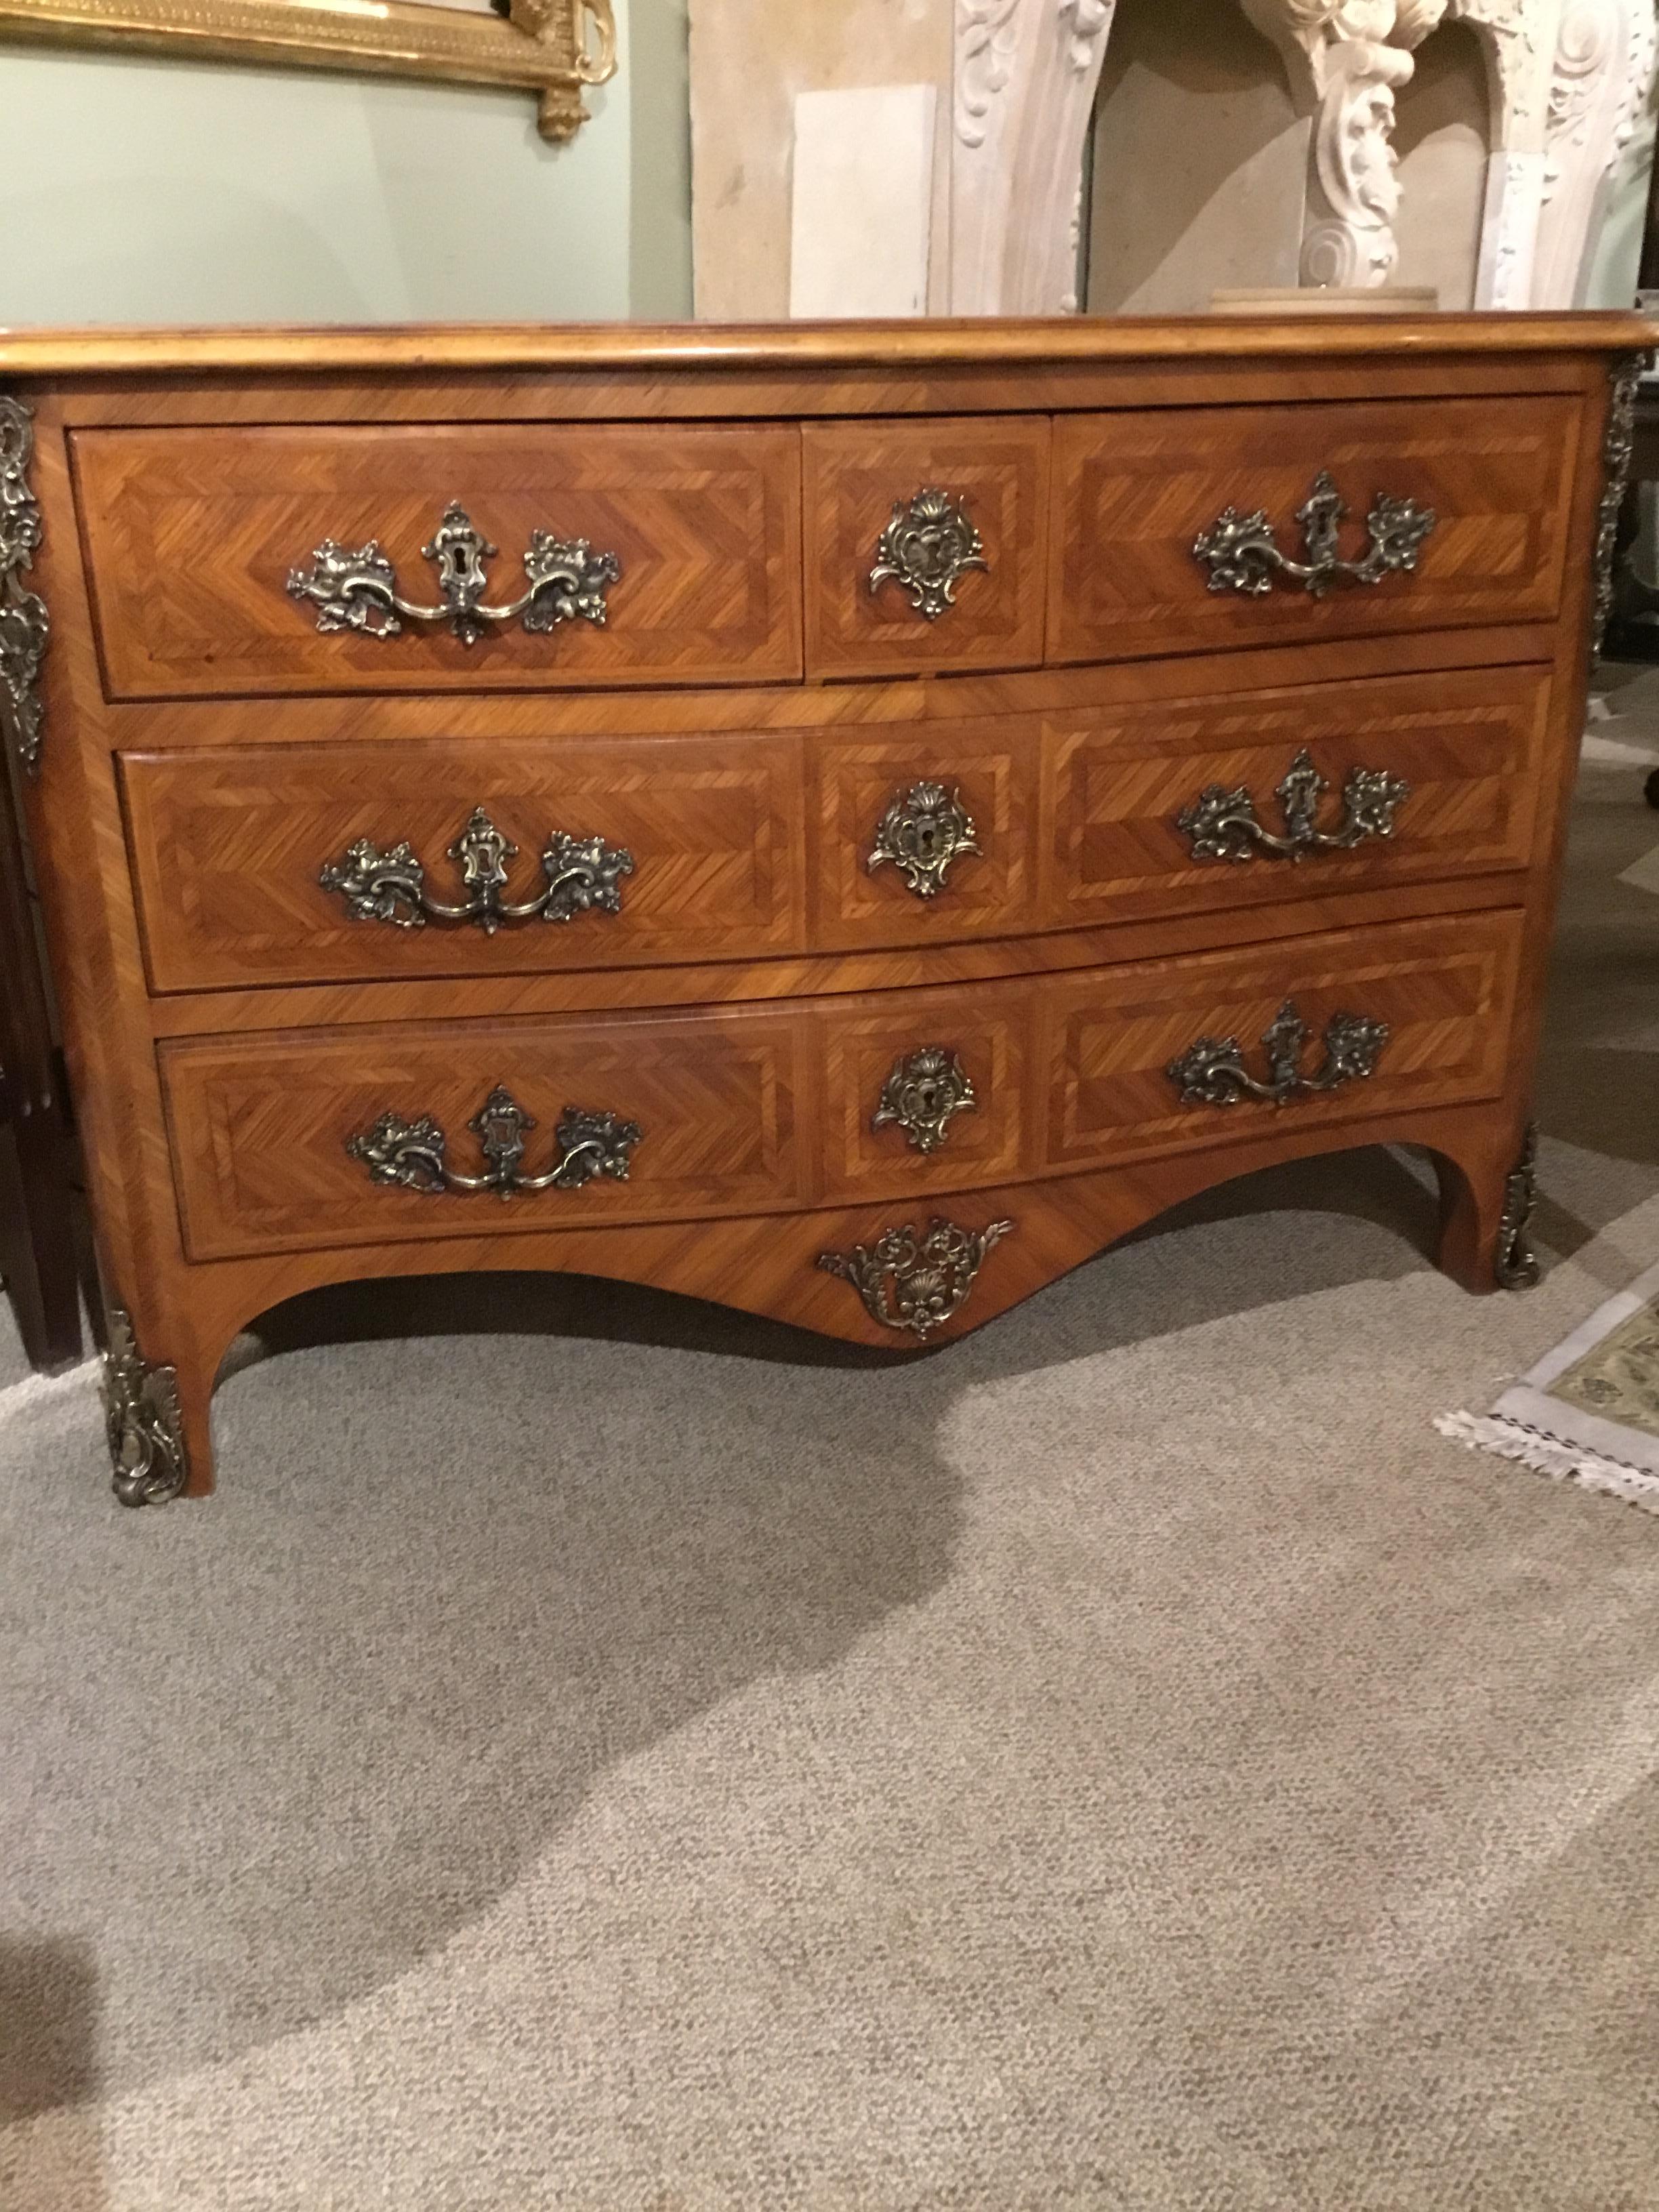 Handsome commode with bronze dore mounts. Three drawers that slide open easily and
Has deep drawers for great storage. Walnut marquetry that is inlaid in geometric patterns.
  